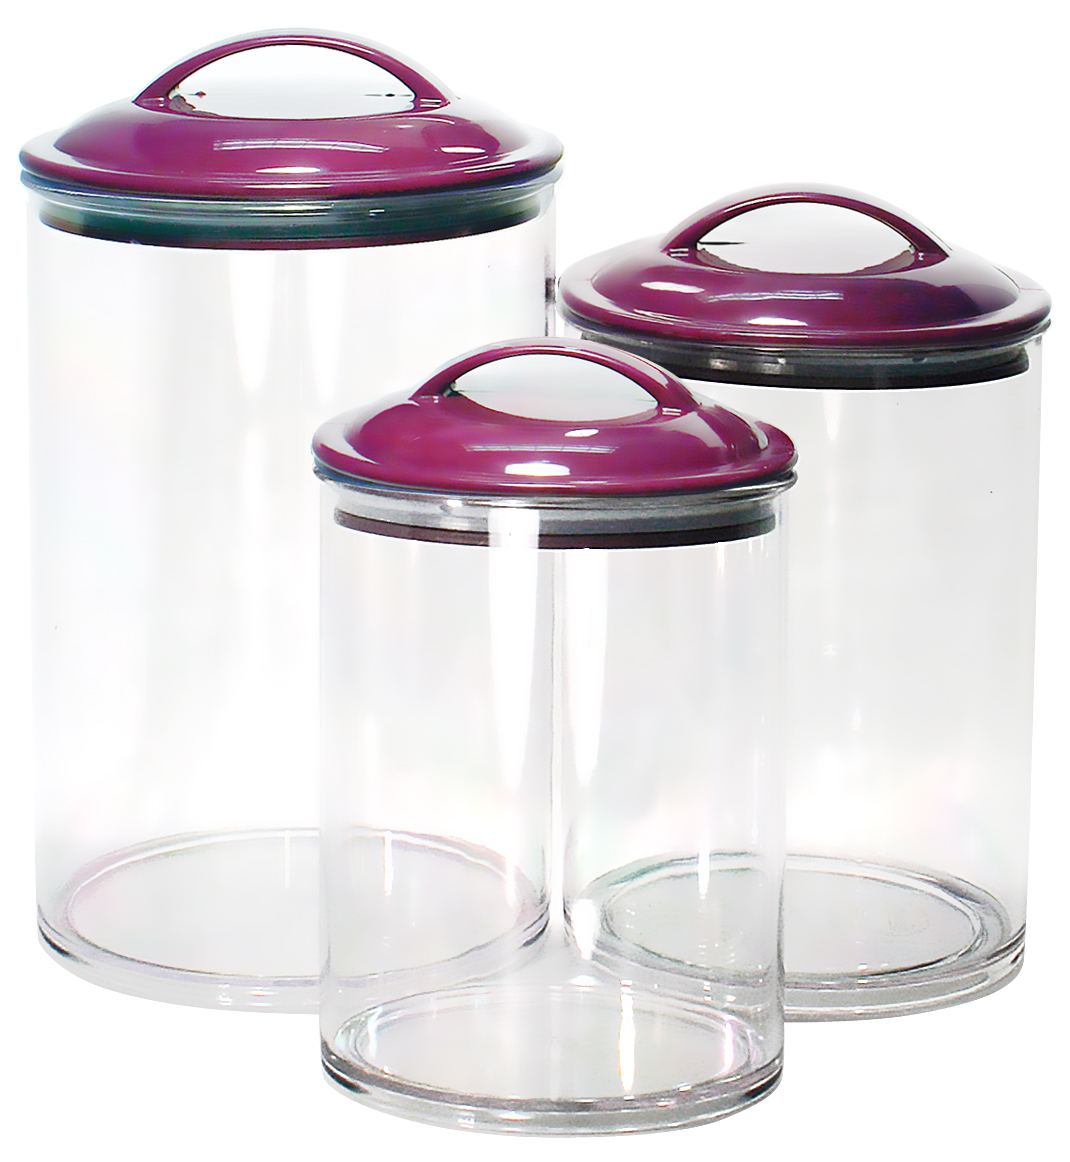 11152 Plum Acrylic Canister - Set Of 3